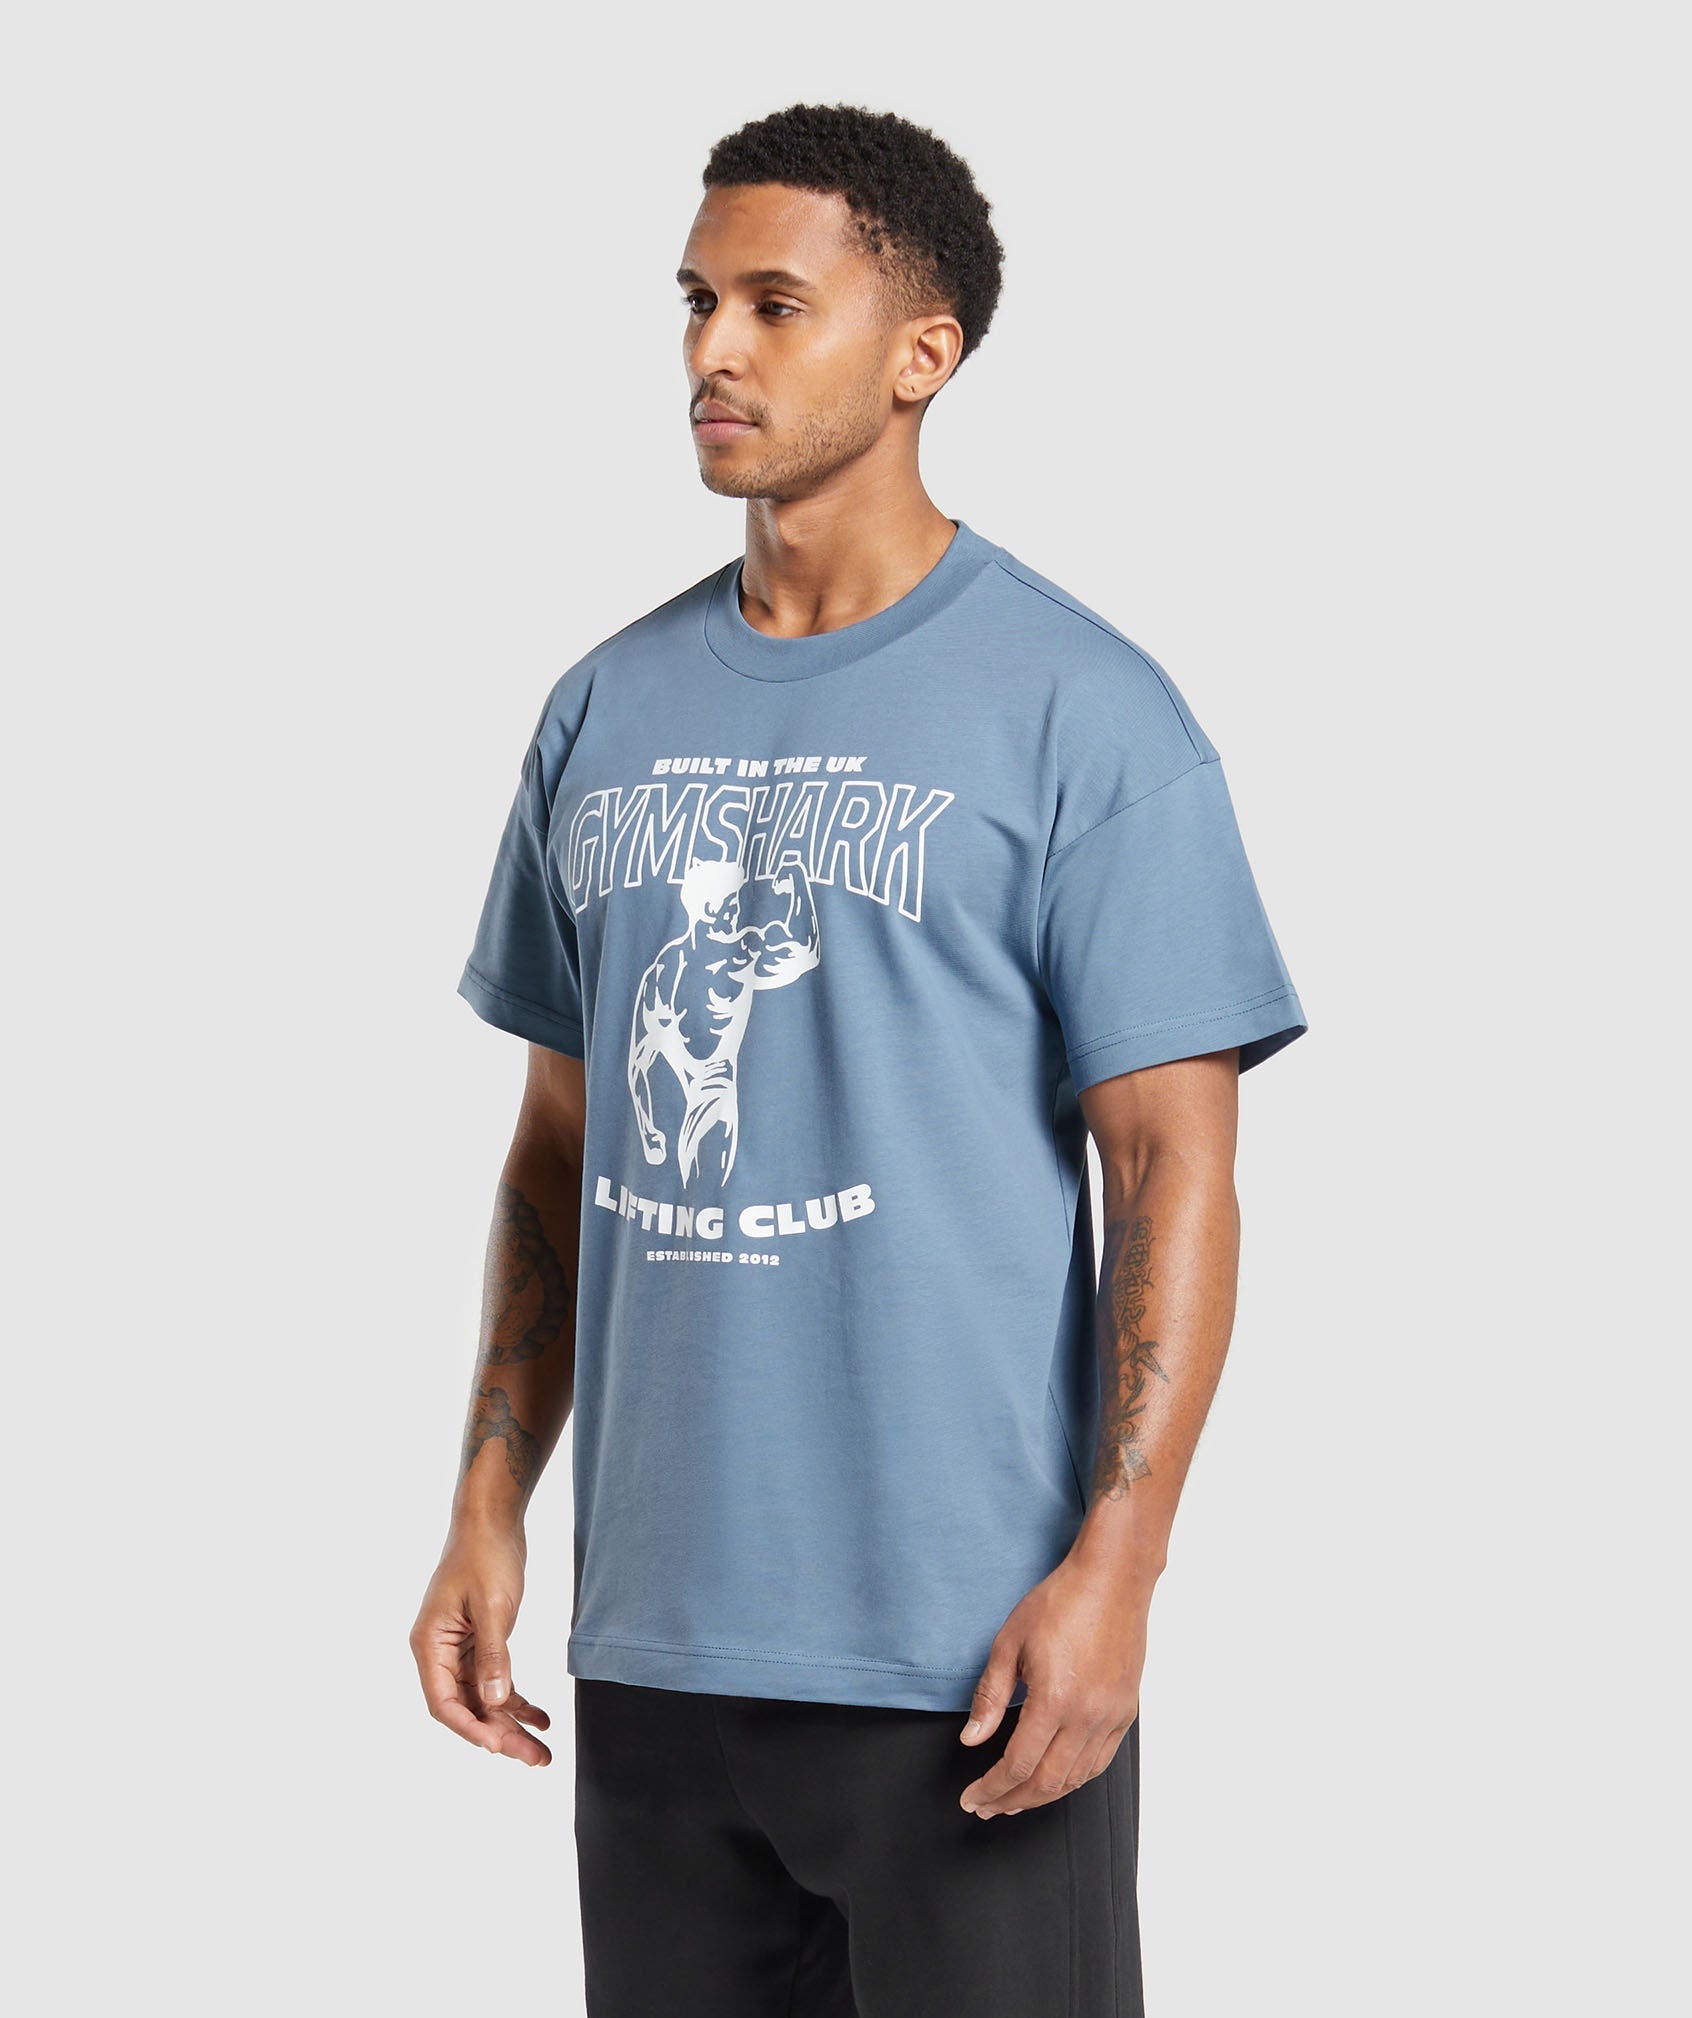 Built in the UK T-Shirt in Faded Blue - view 3